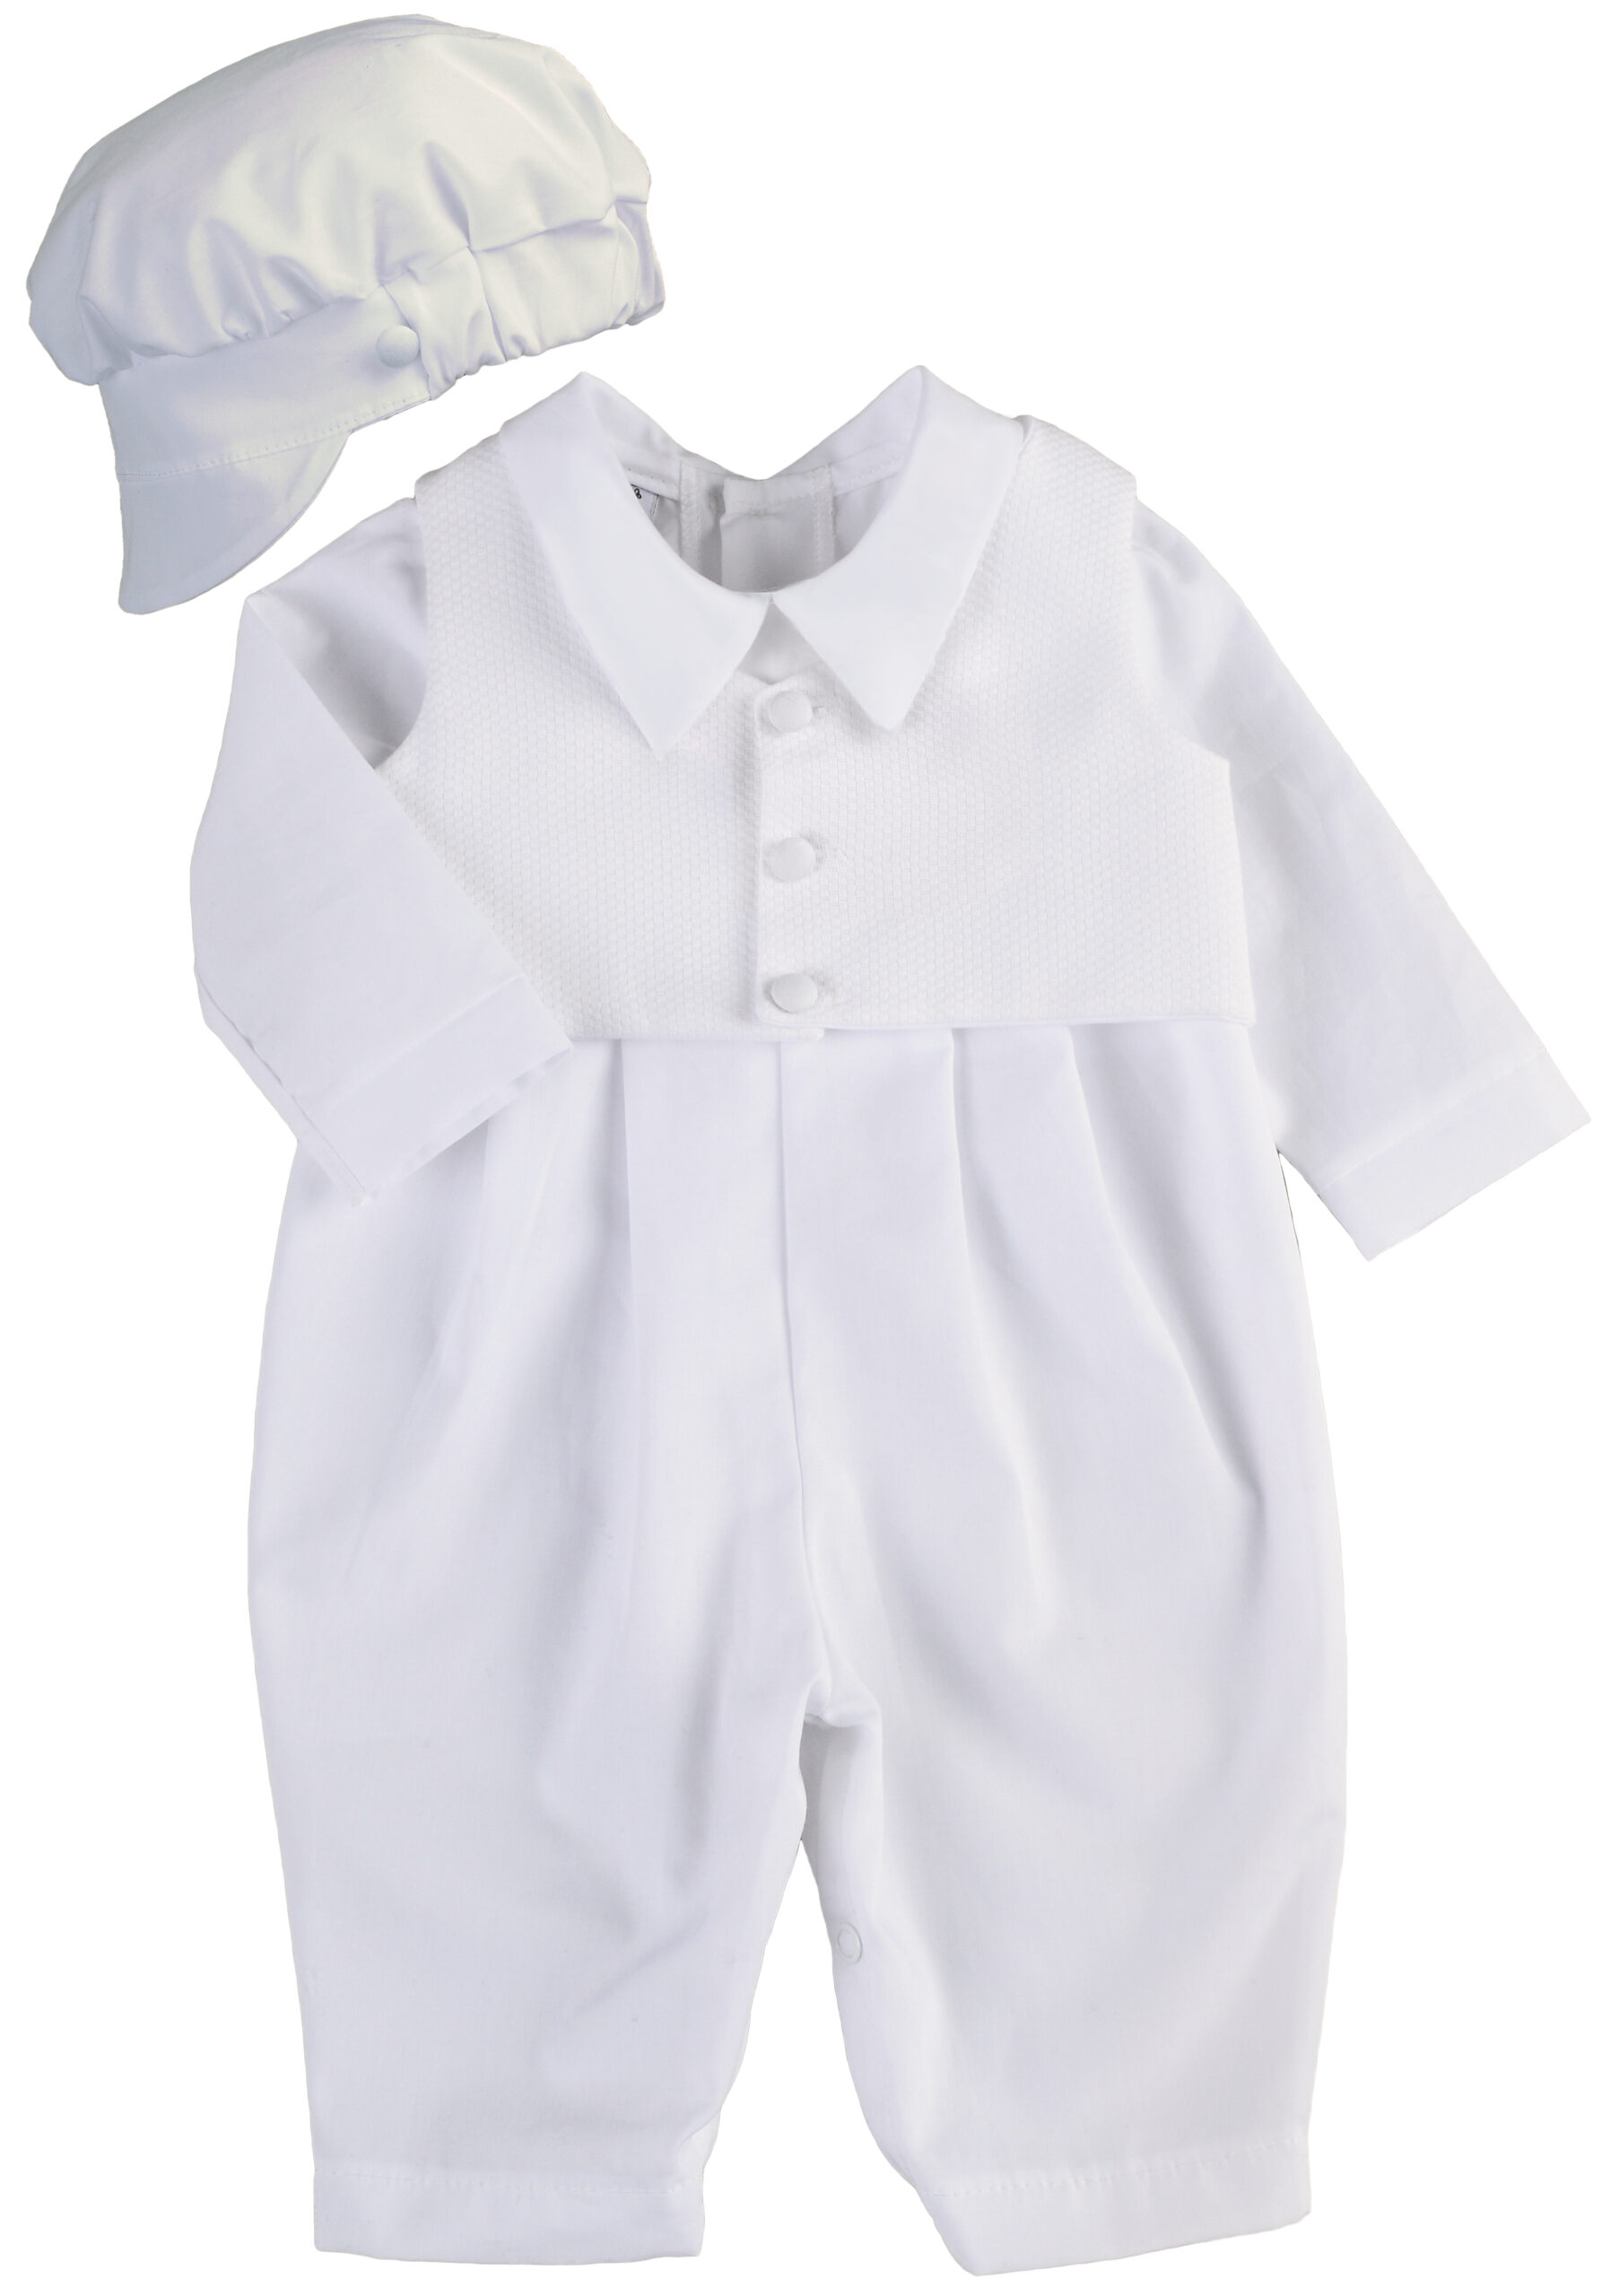 Alexander Christening Outfit with hat